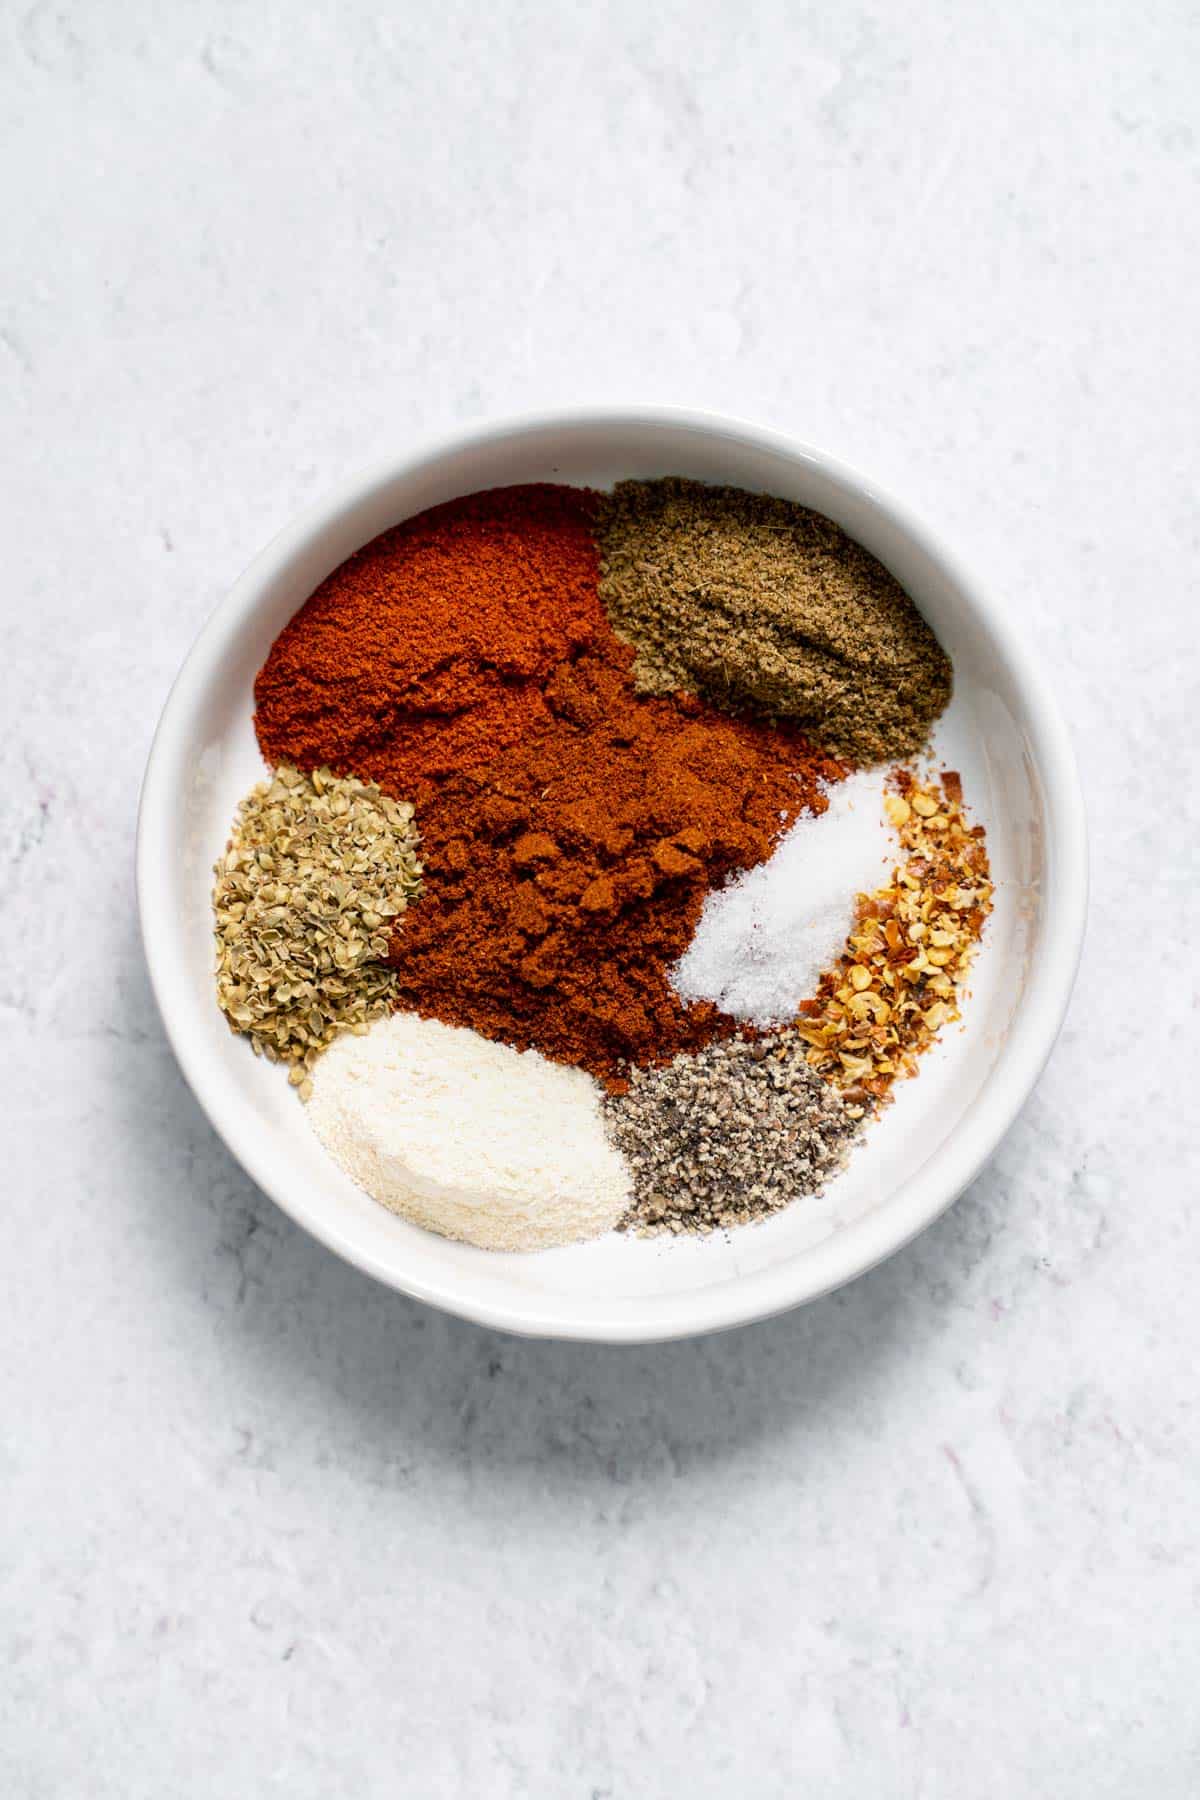 mix of seasonings and spices in one bowl